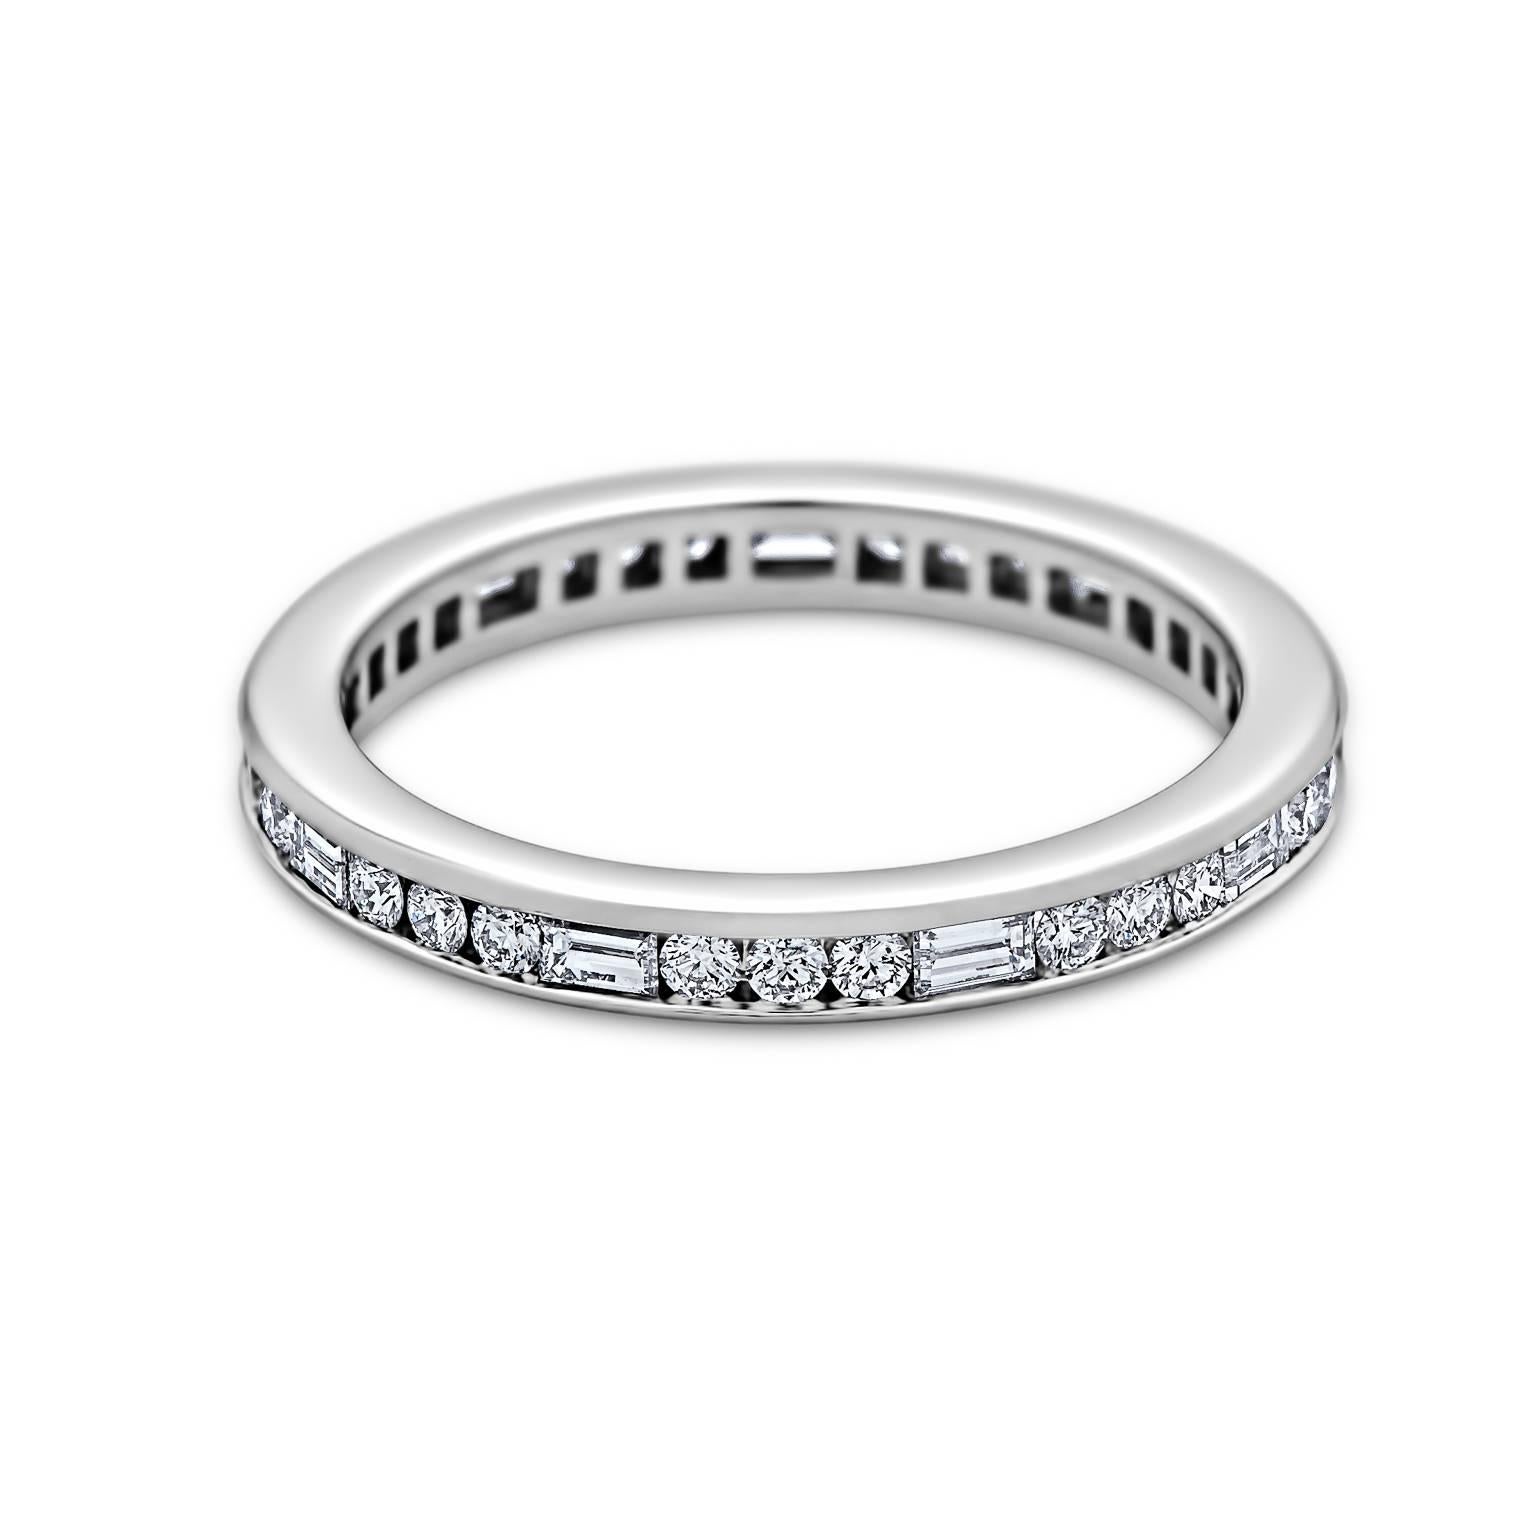 The perfect combination of round and baguette cut diamonds make this eternity band simply brilliant. Total round cut diamond weight .36 carats. Total baguette cut diamond weight .32 carats. D-F color. VVS clarity. Band is 2.5 mm wide. Size 6 1/4 US.